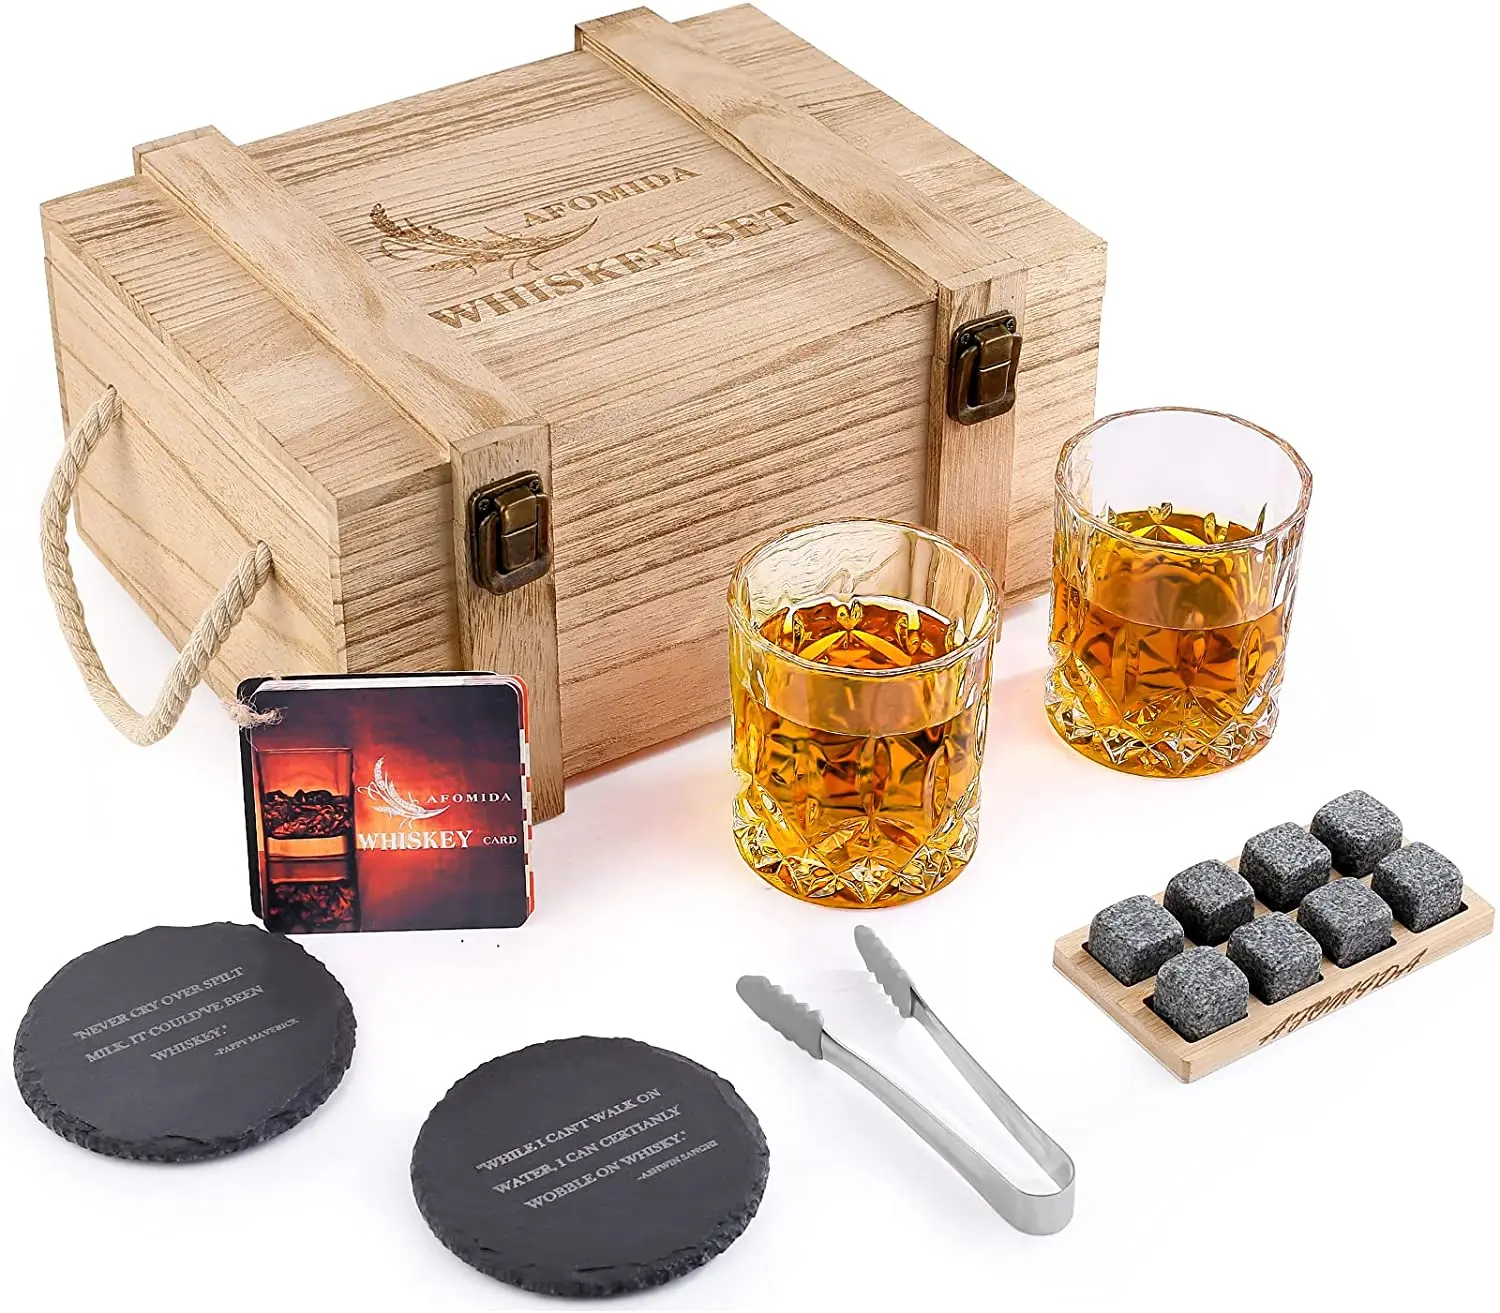 Wholesale Whiskey Stone Gift Set 9 Granite Whisky Rocks Burbon Gifts Cool  Presents for Men Unique Anniversary Birthday Wedding Gift Ideas From  m.